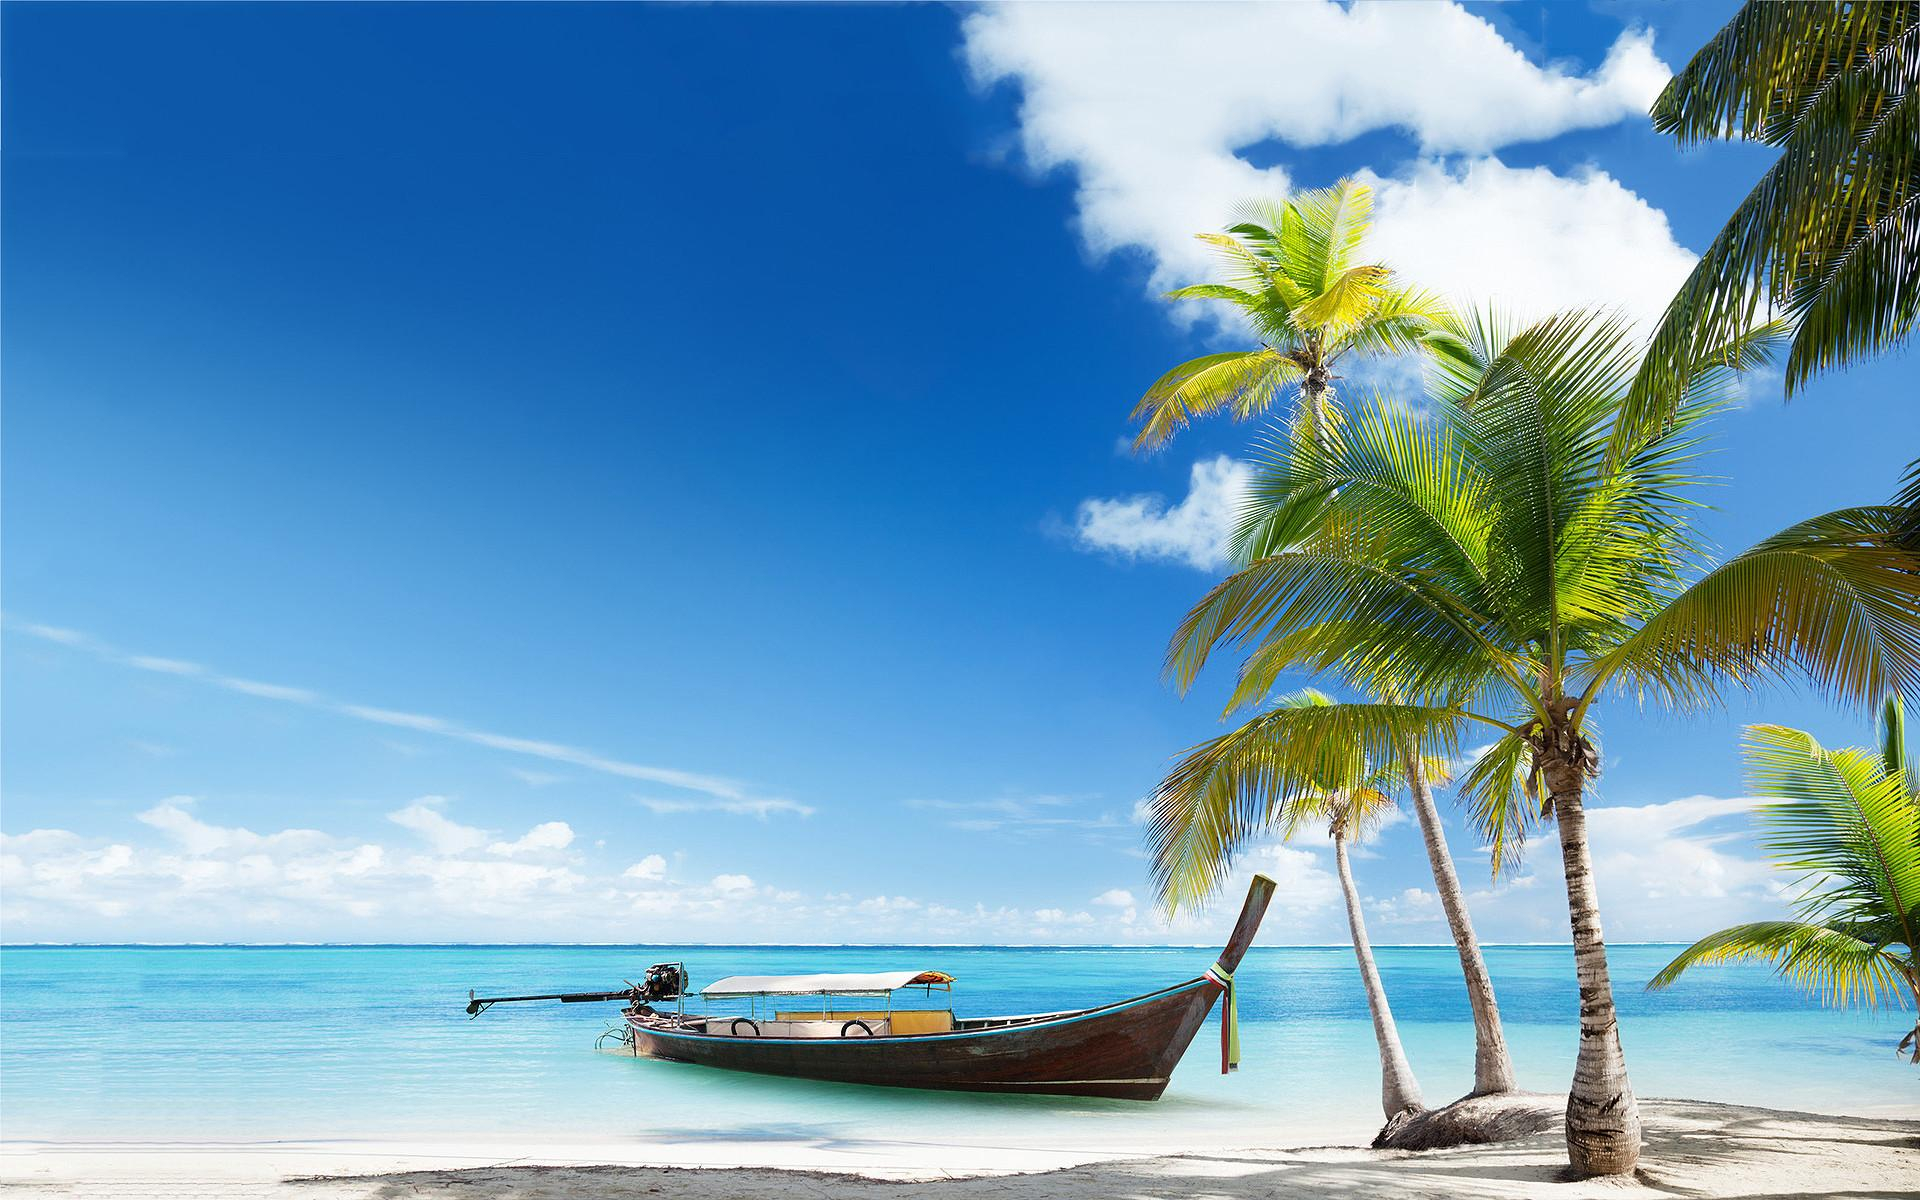 1920x1200 Tropical Beach Scenery Wallpapers Top Free Tropical Beach Scenery Backgrounds